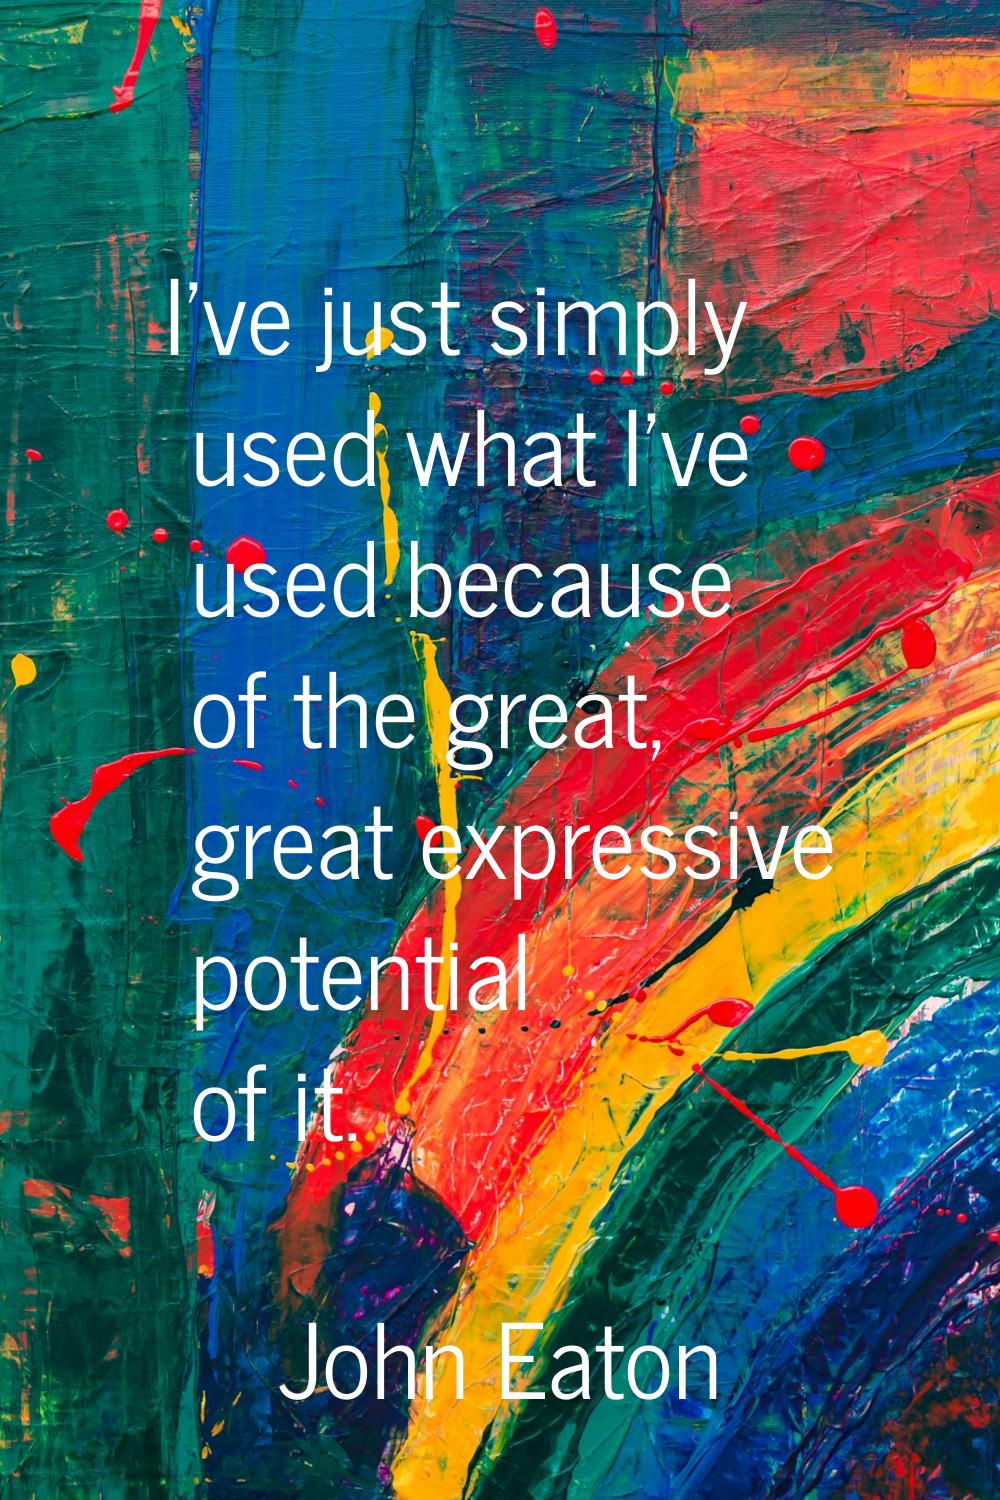 I've just simply used what I've used because of the great, great expressive potential of it.